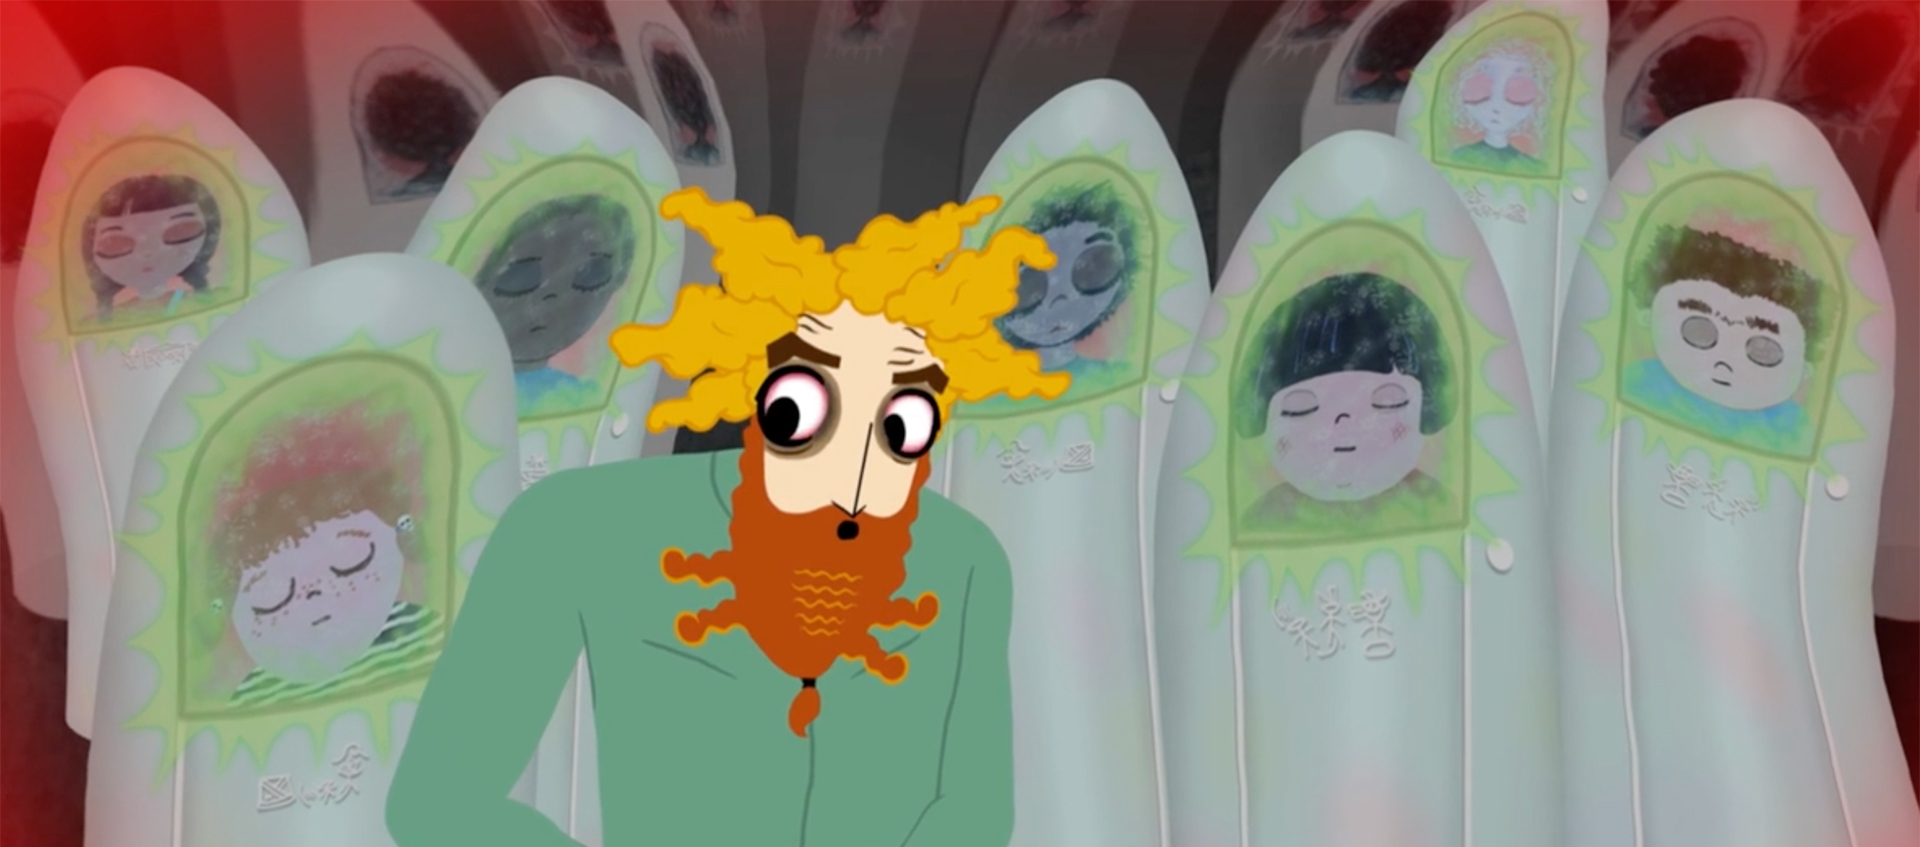 An image of a cartoon figure with a red beard and yellow, frizzy hair. Behind the figure are several gray tubes, each with a person inside.